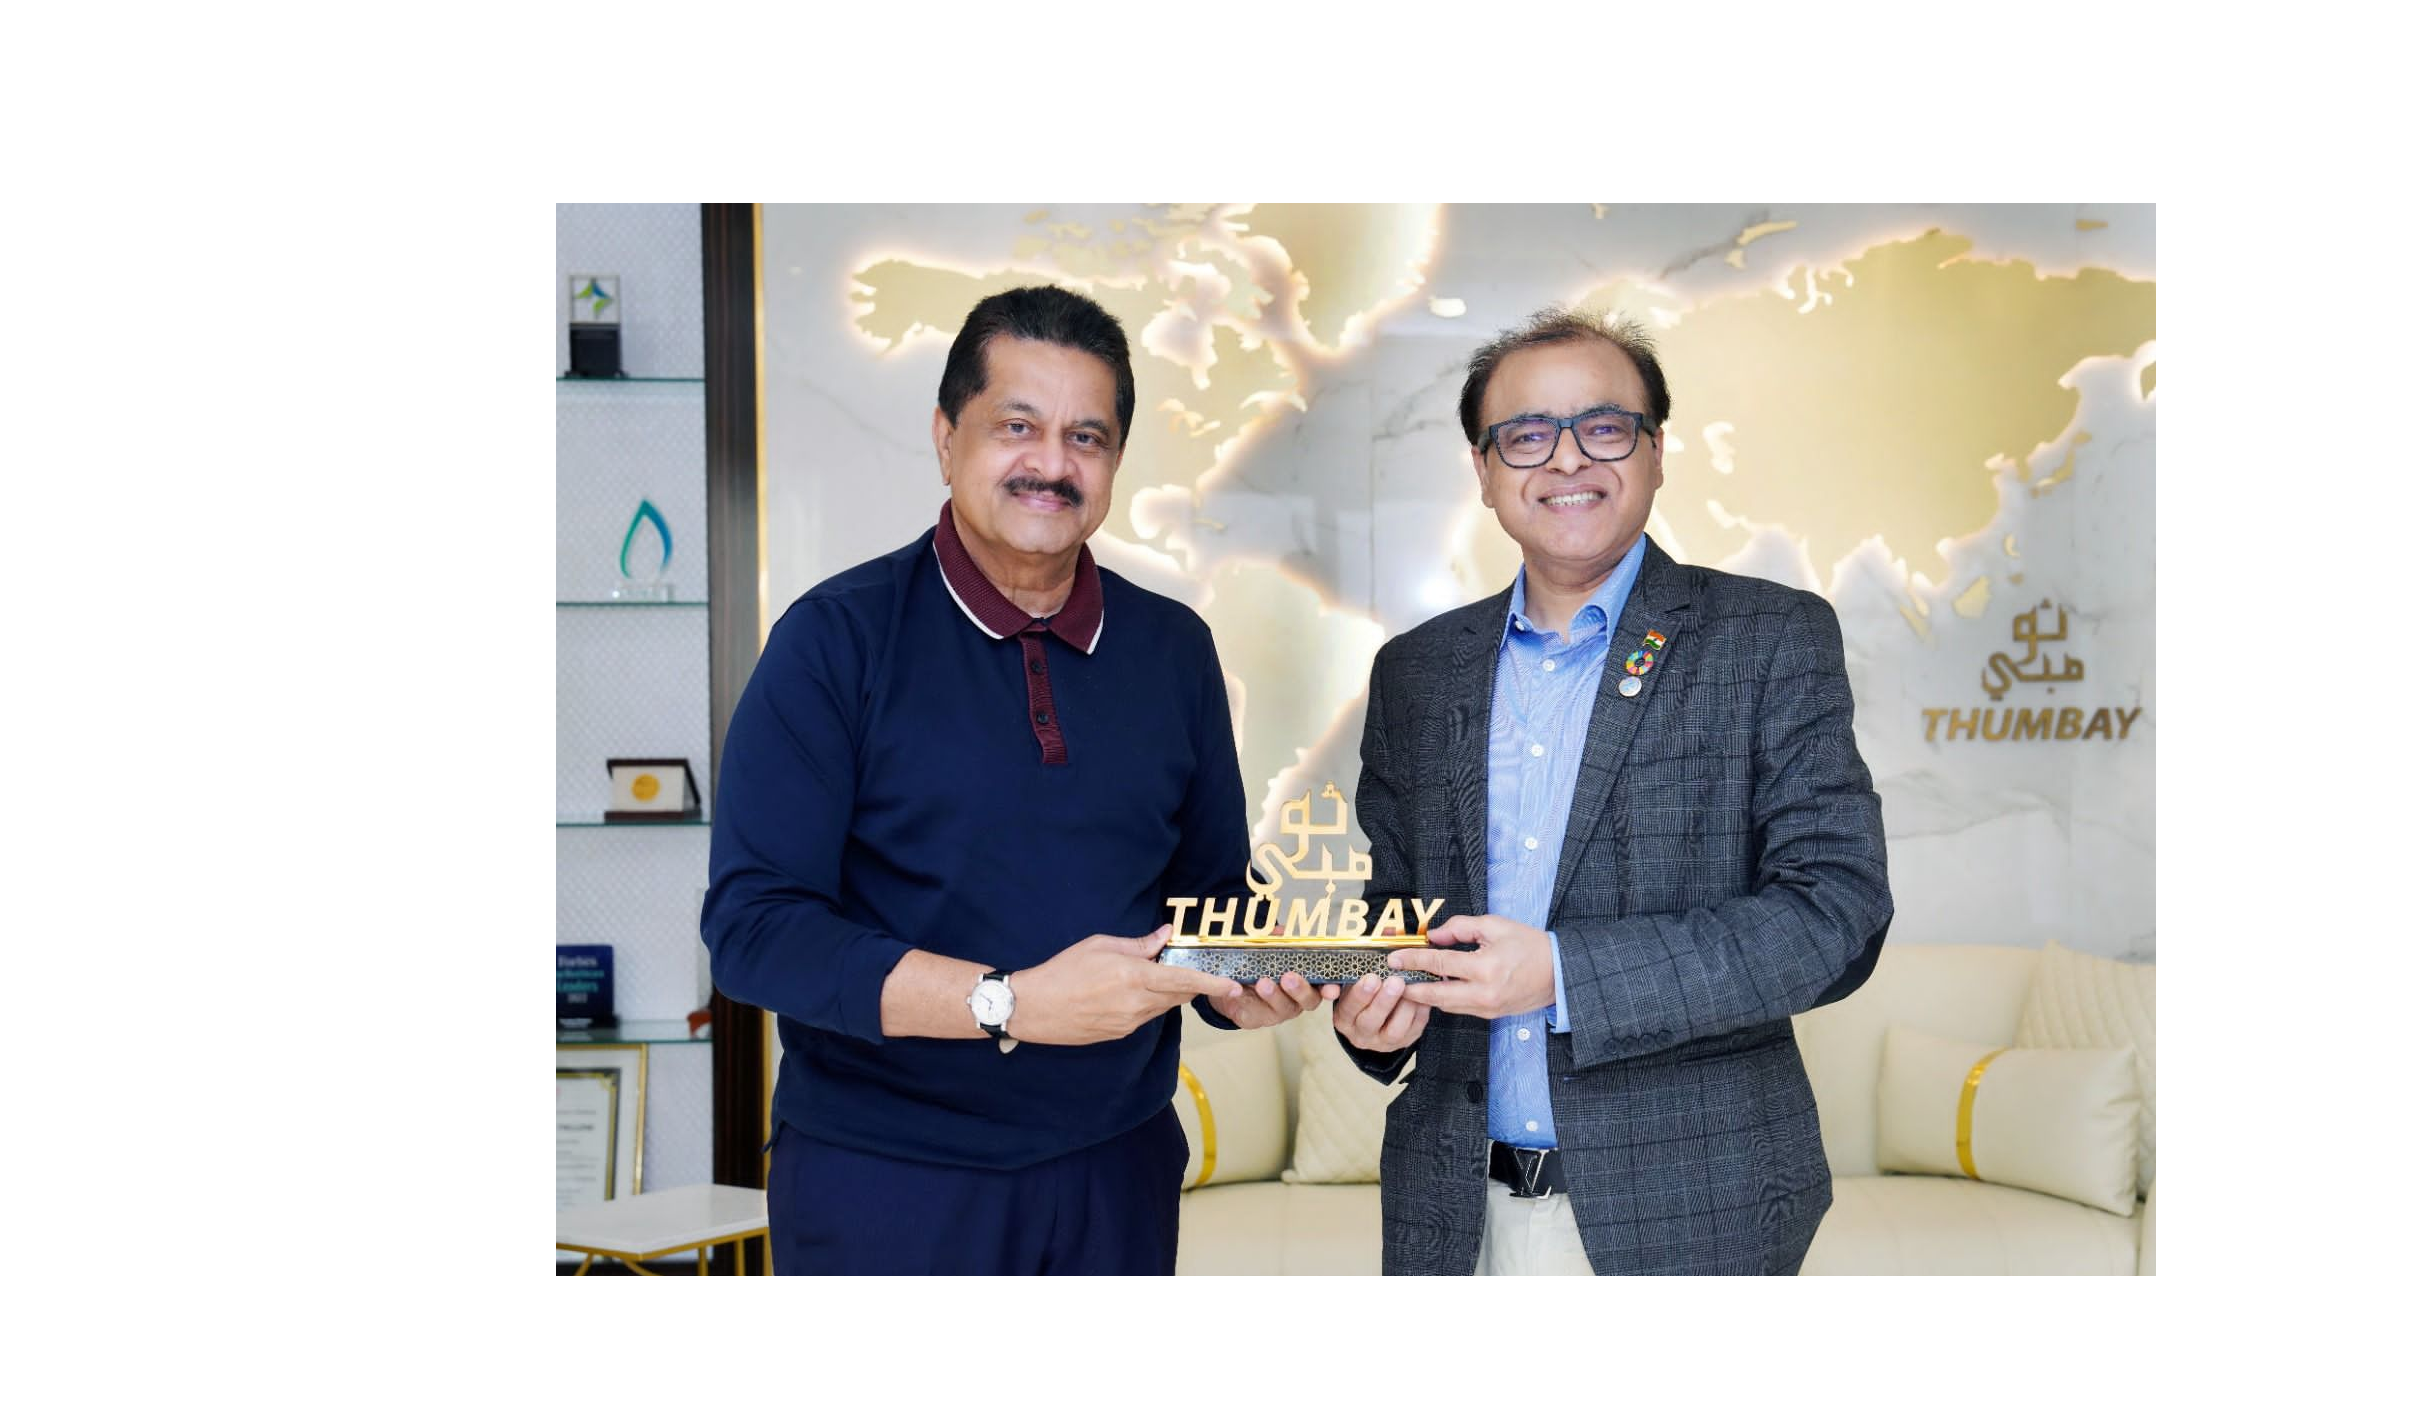 Interaction with Dr. Thumbay Moideen